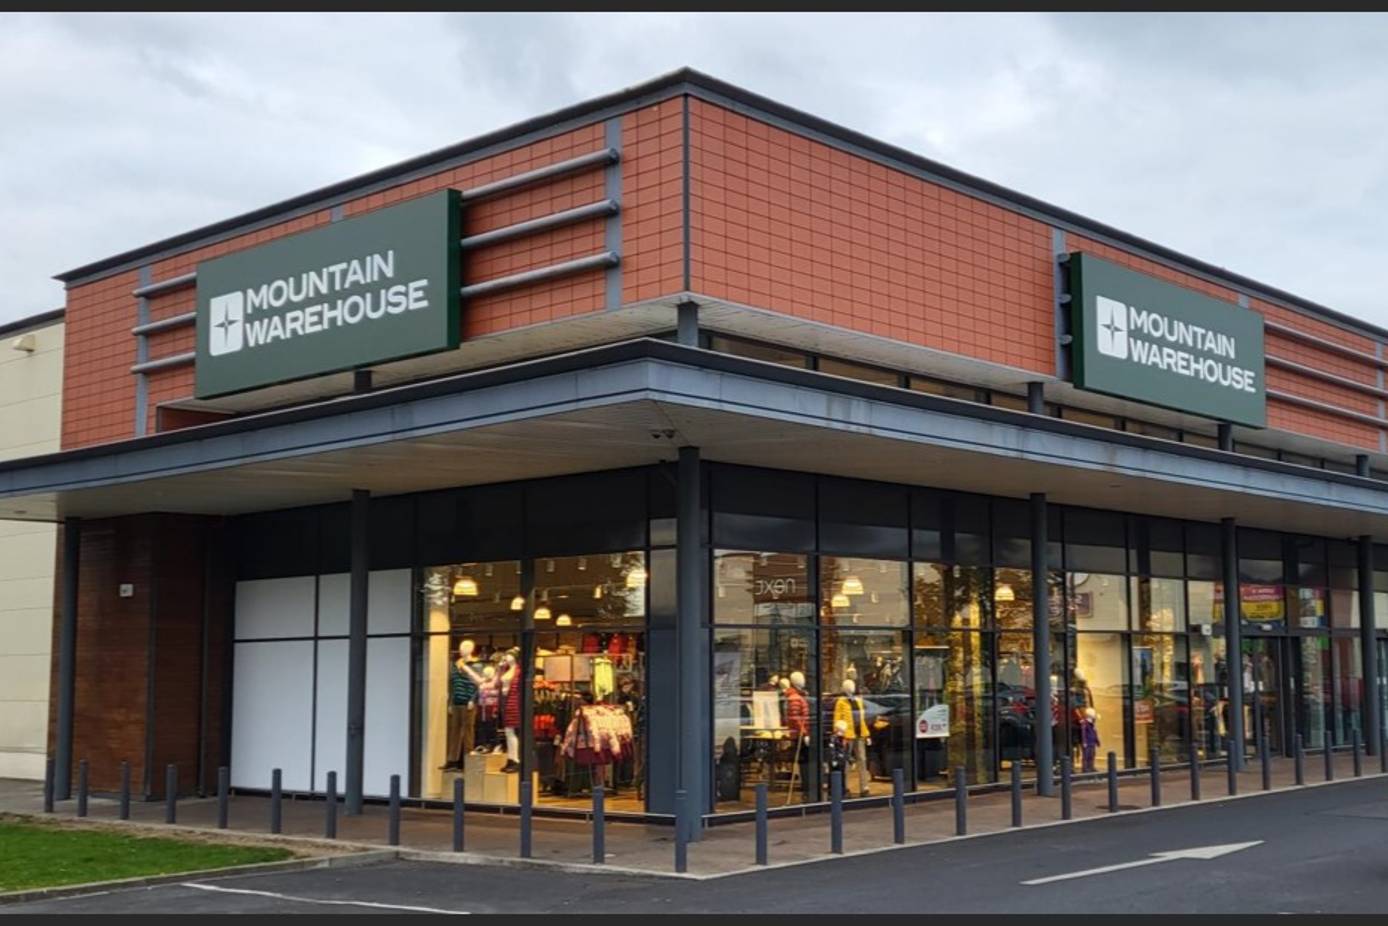 Mountain Warehouse Norwich building is up for sale